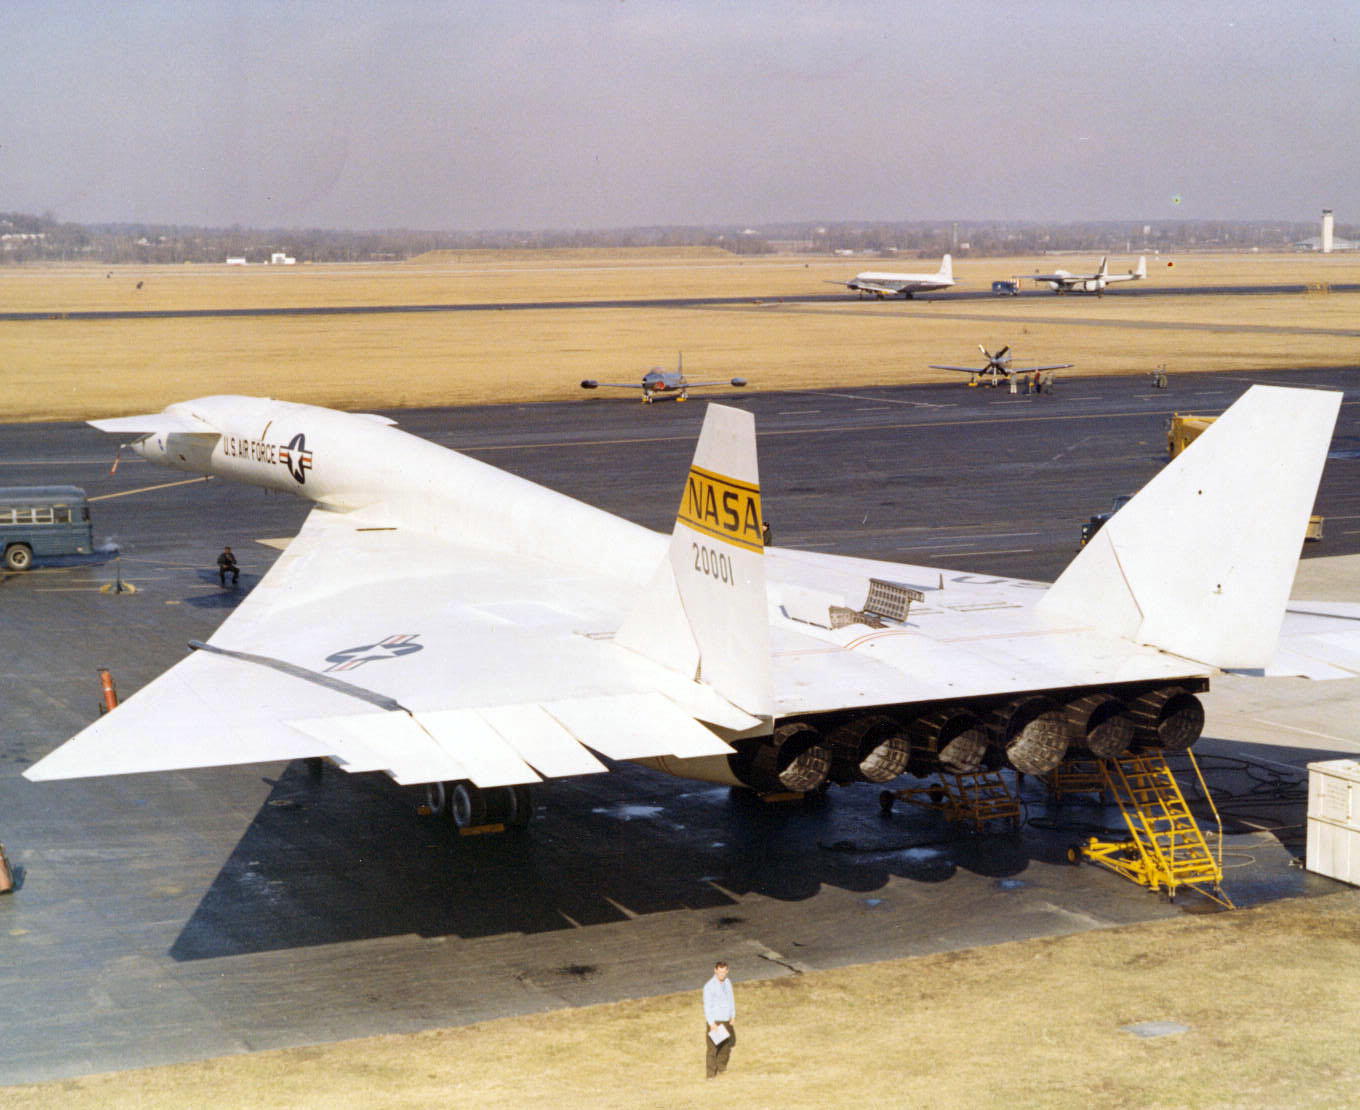  North American Aviation XB-70A-1-NA Valkyrie 62-0001 at Wright-Patterson Air Force Base, Ohio. This photograph shows the twelve elevons that act as elevators, flaps and ailerons, the swiveling action of the vertical fins, open drag chute doors and the variable exhaust outlets. (U.S. Air Force).